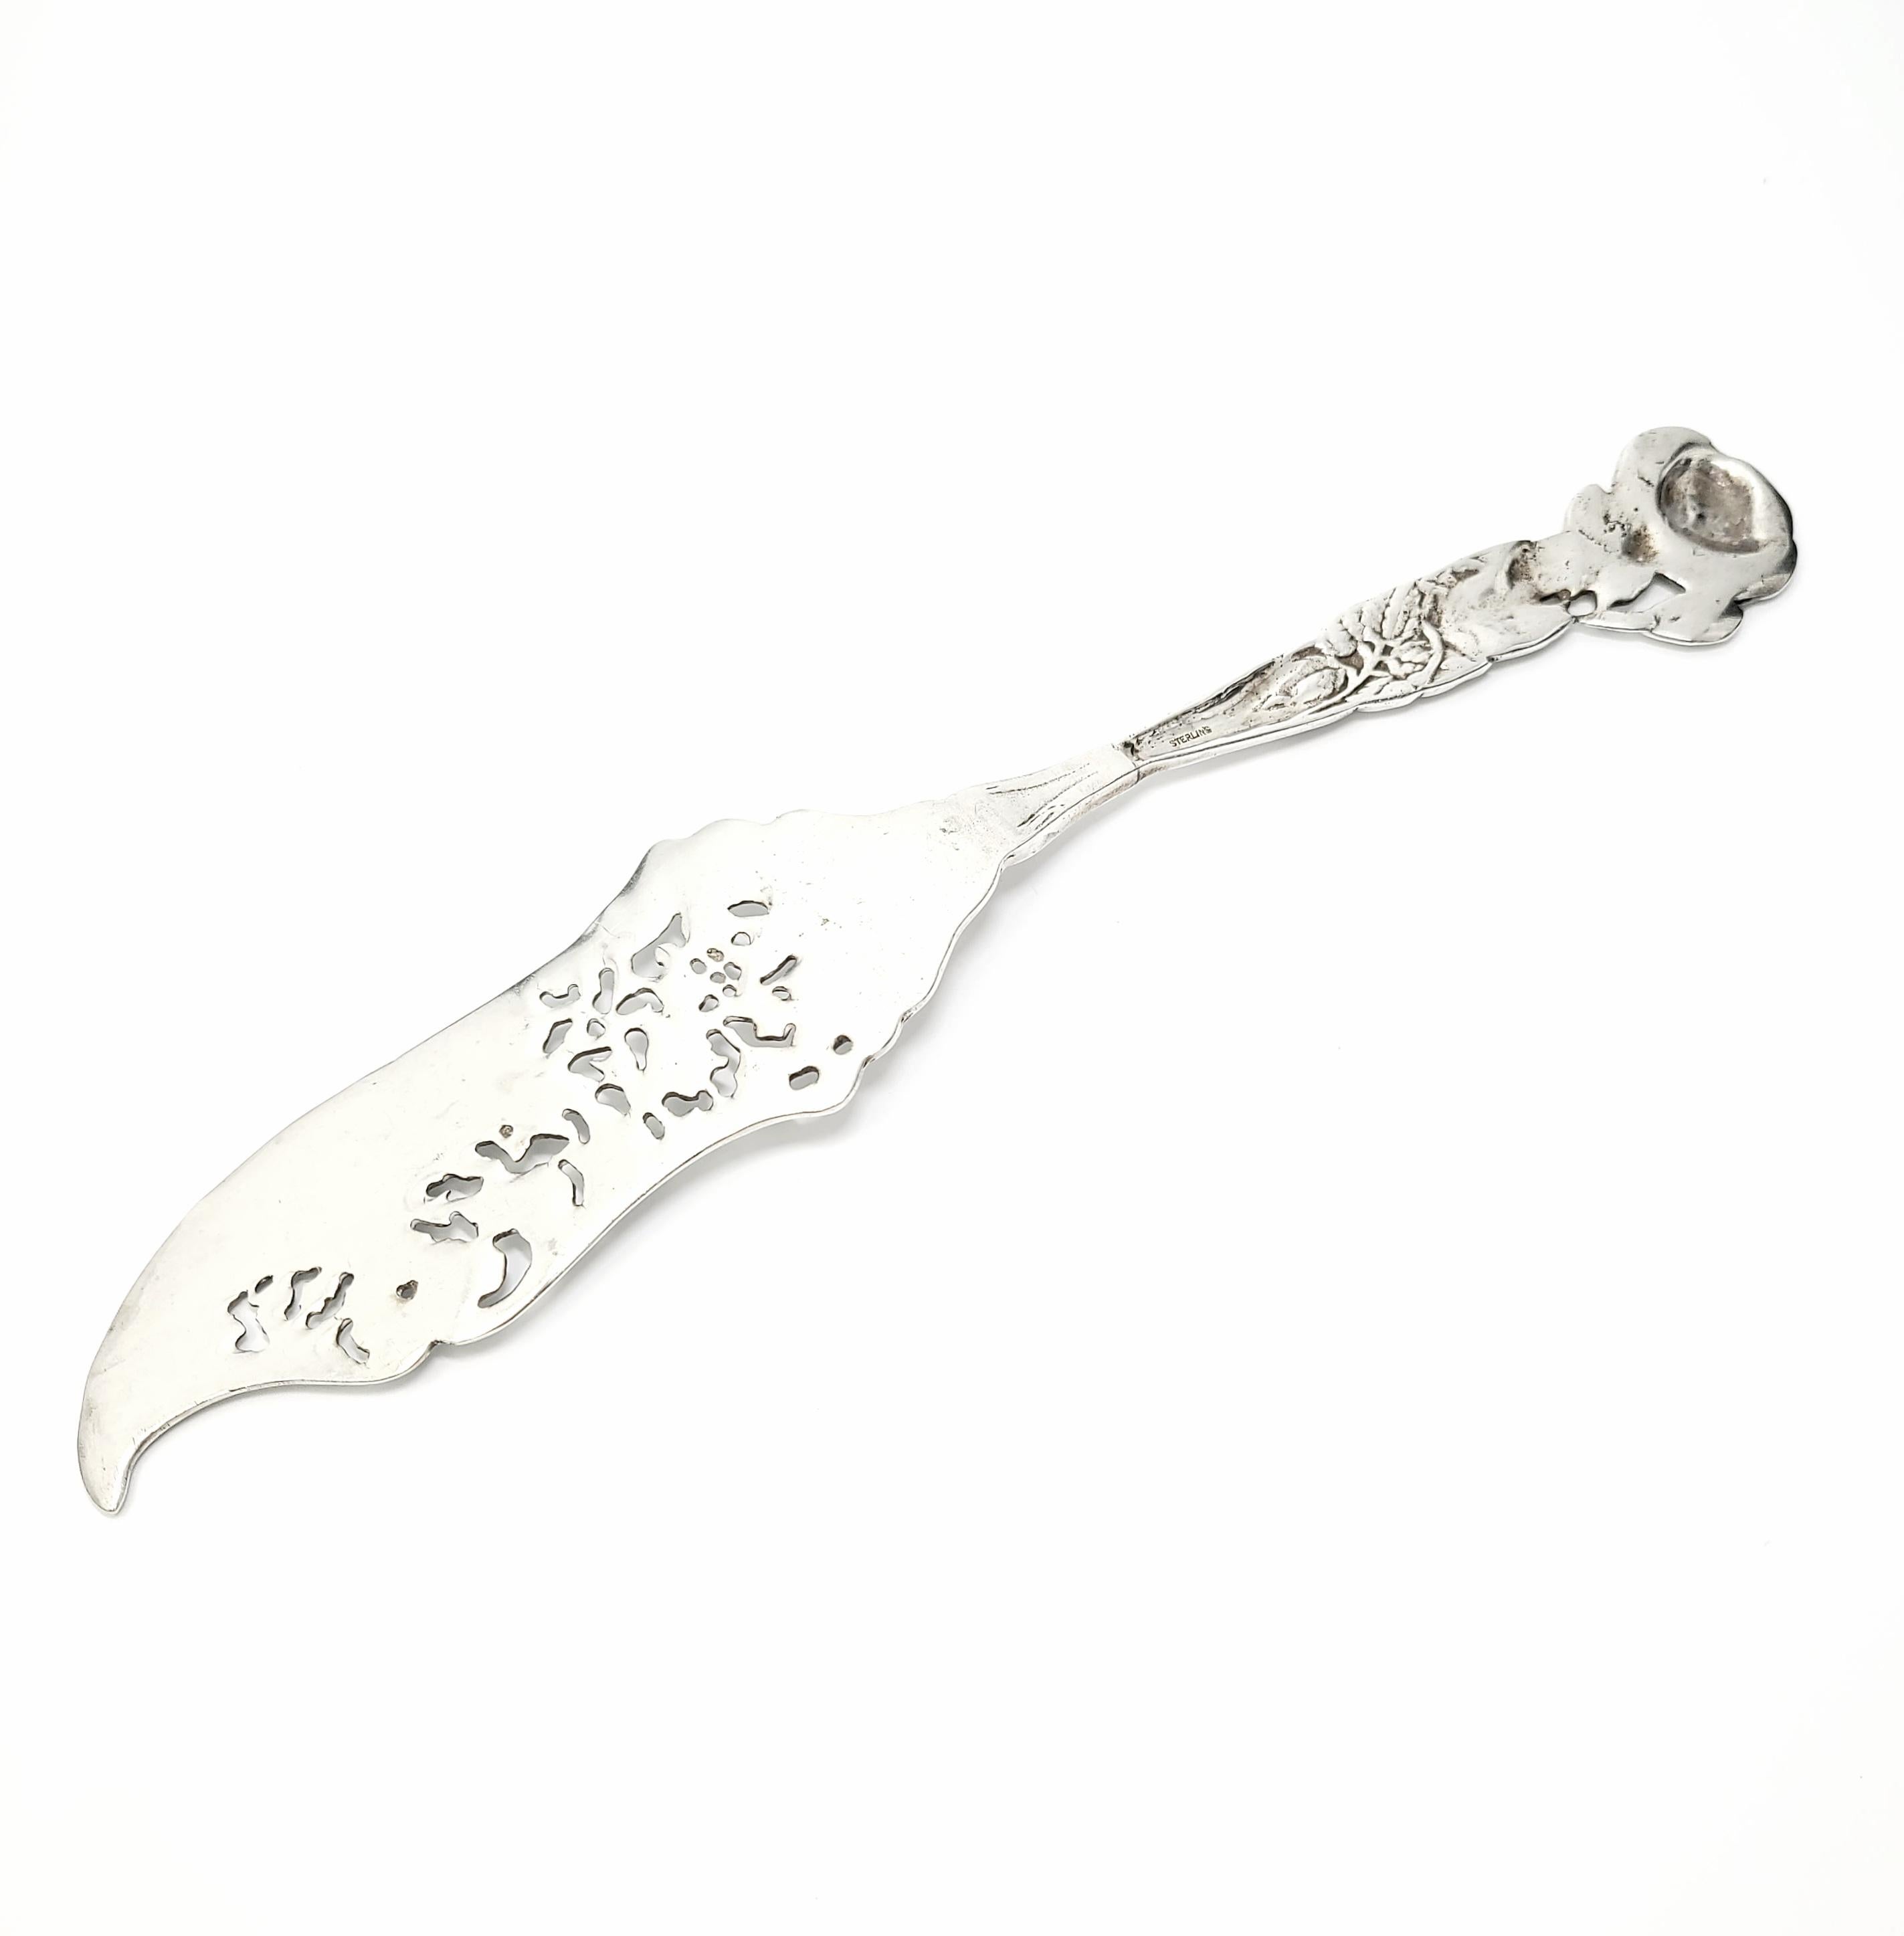 Antique sterling silver serving fish knife.

No monogram.

Beautiful heavy serving fish knife with rose design handle, floral, leaf and scroll design on blade.

Measures approximate 10 5/8